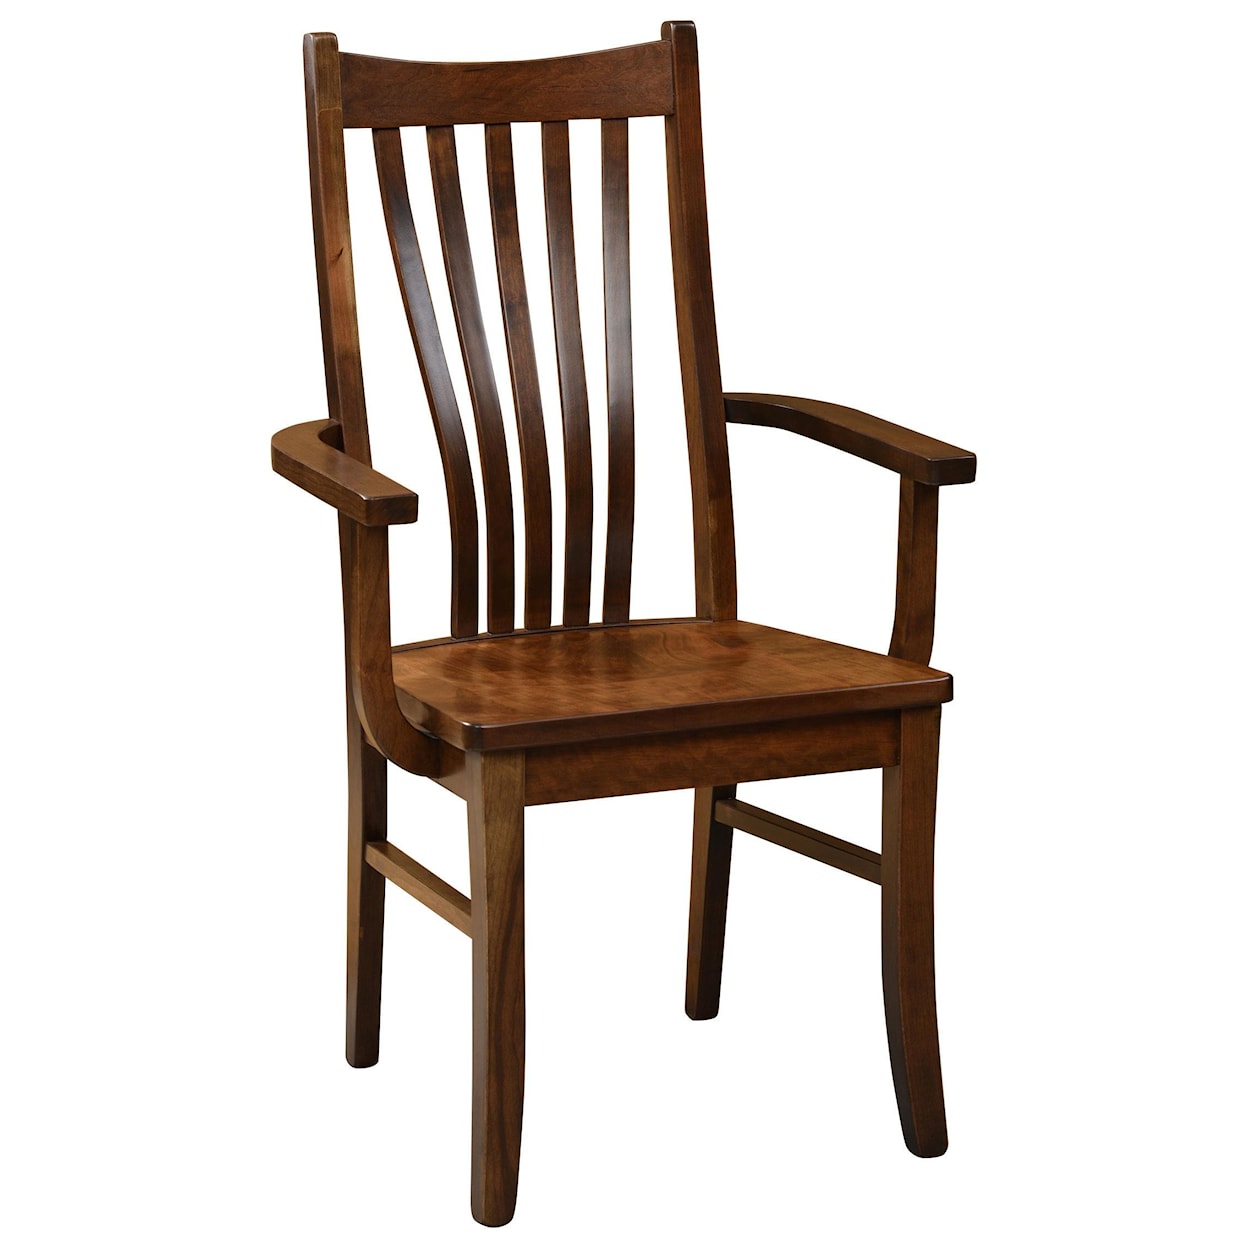 Wengerd Wood Products Reagan Arm Chair